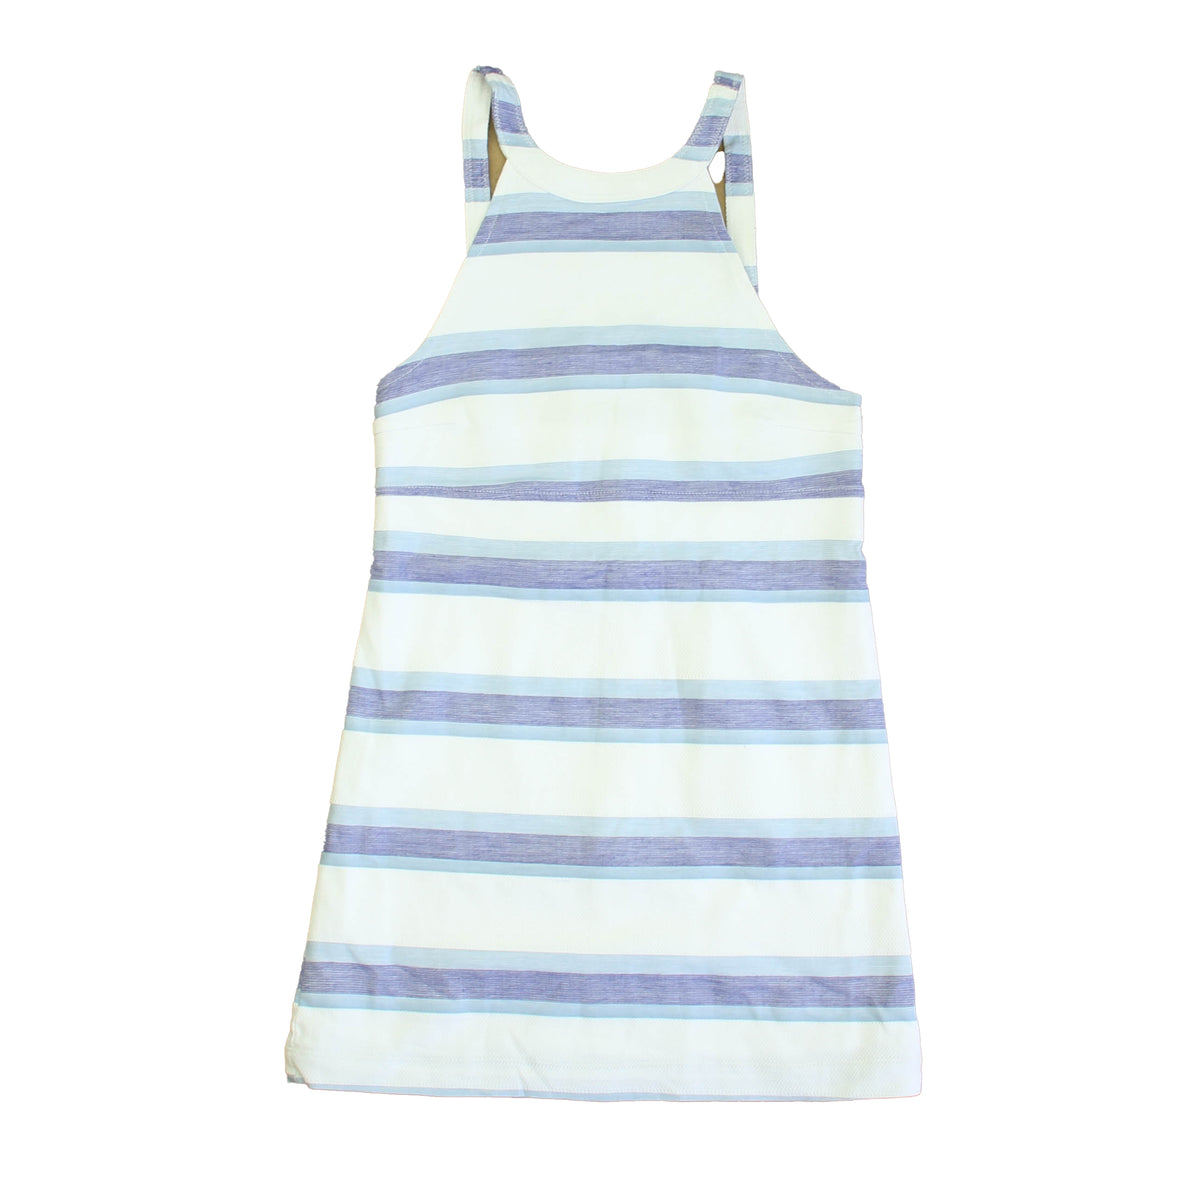 New with Tags: Picnic Stripe Dress -- FINAL SALE